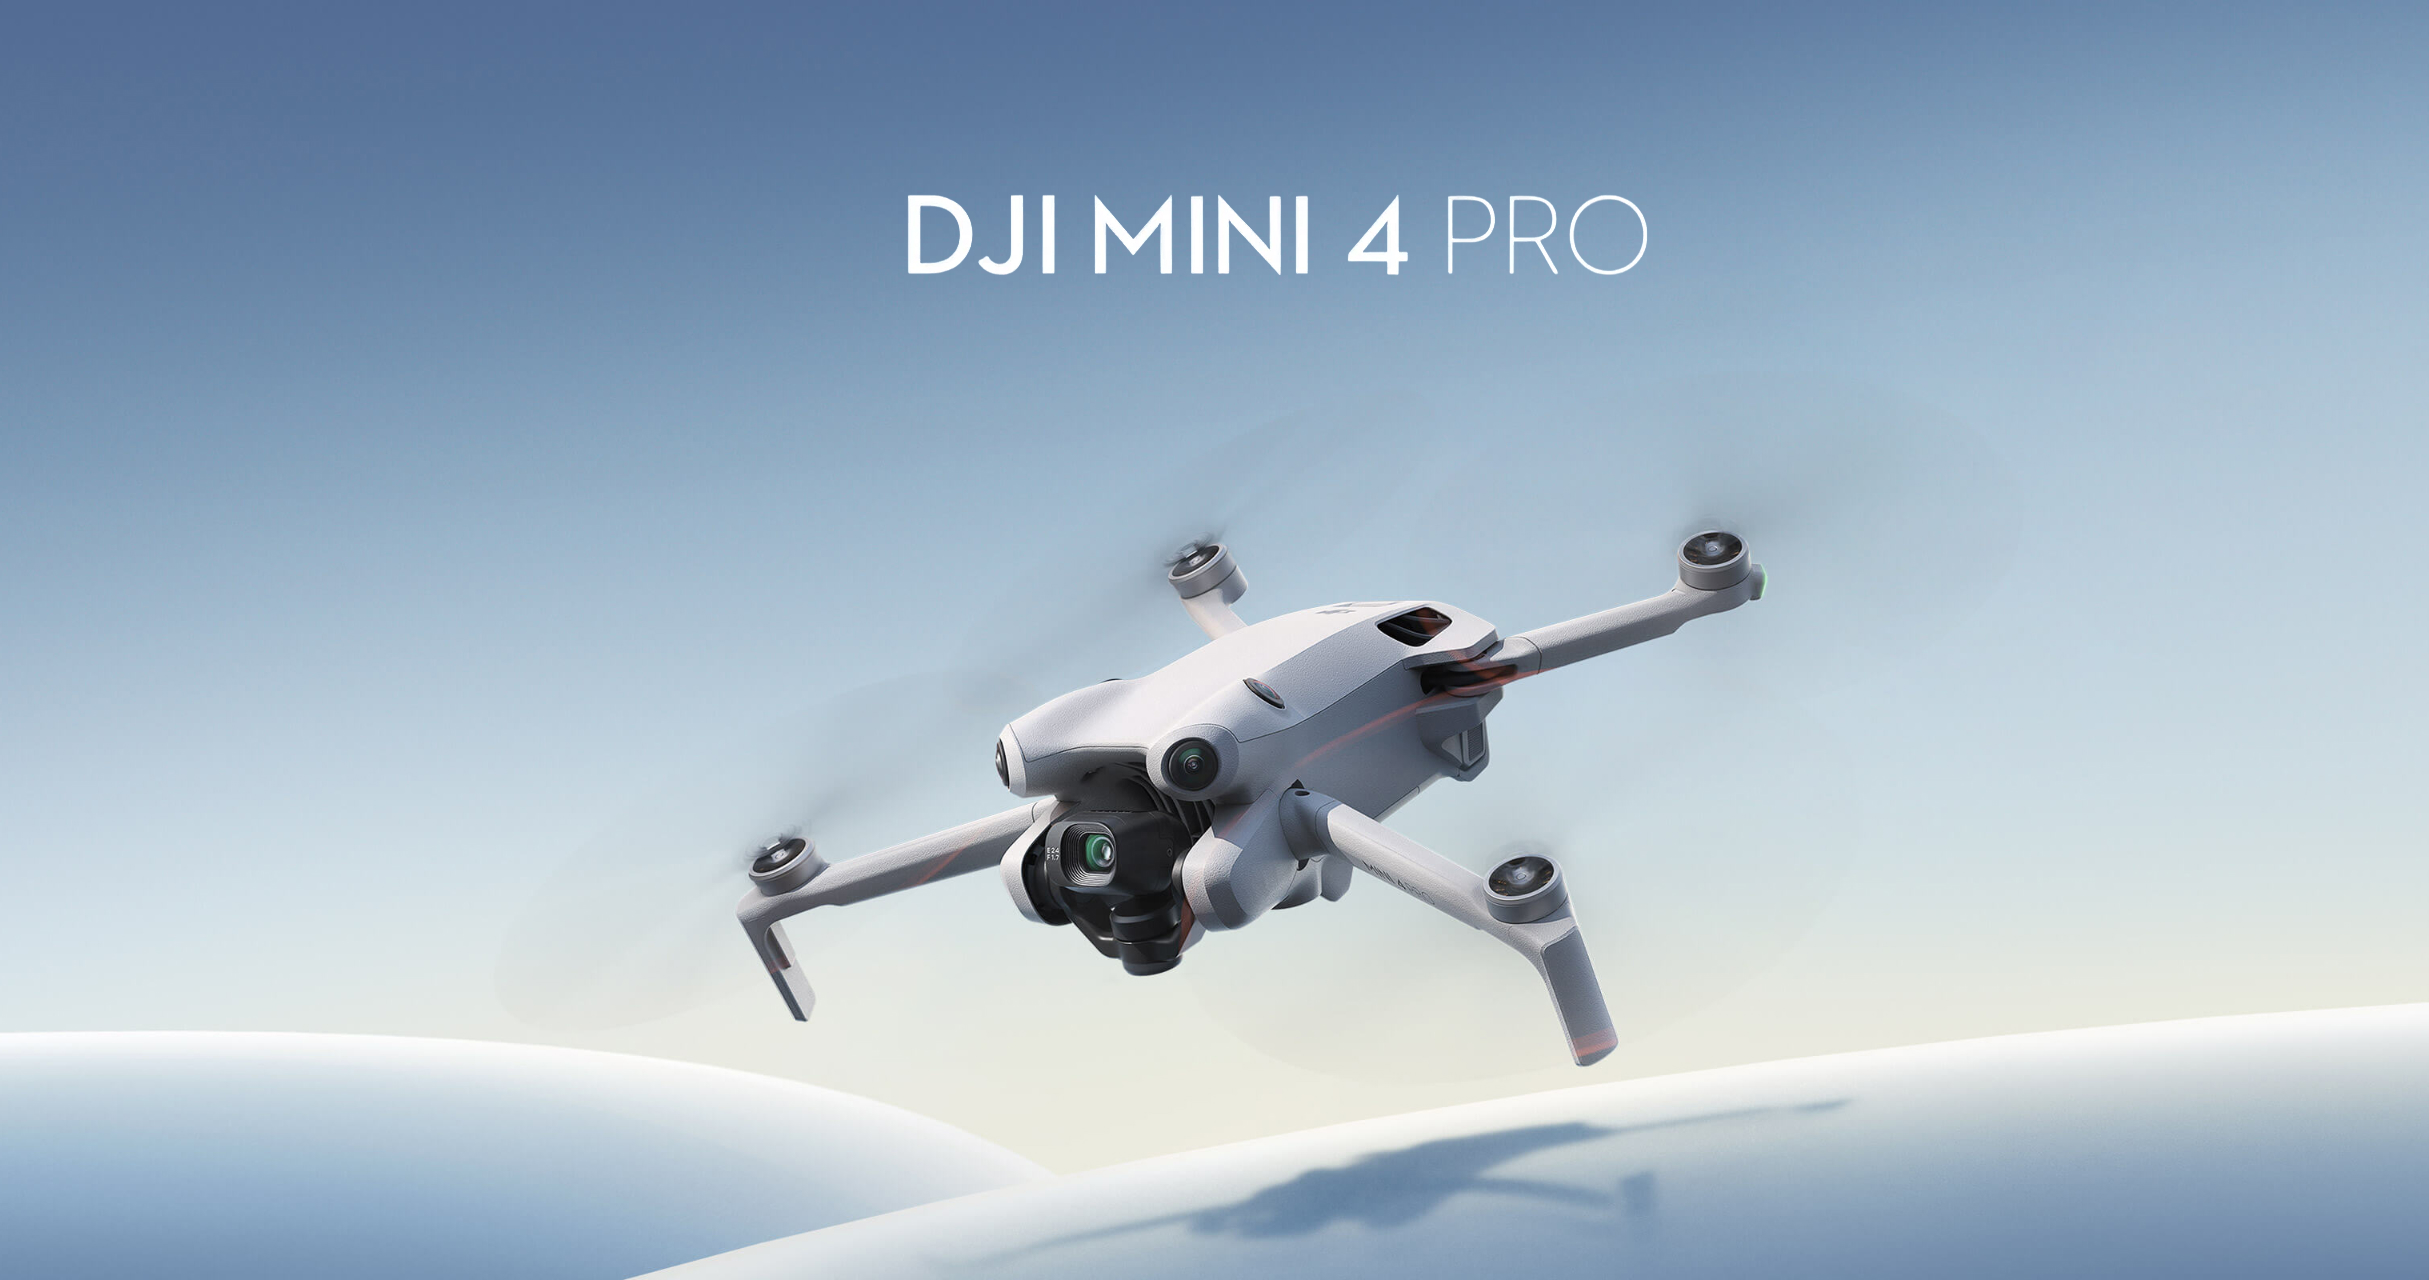 DJI Mini 4 Pro launched in Nepal with improved flight performance and intelligent features